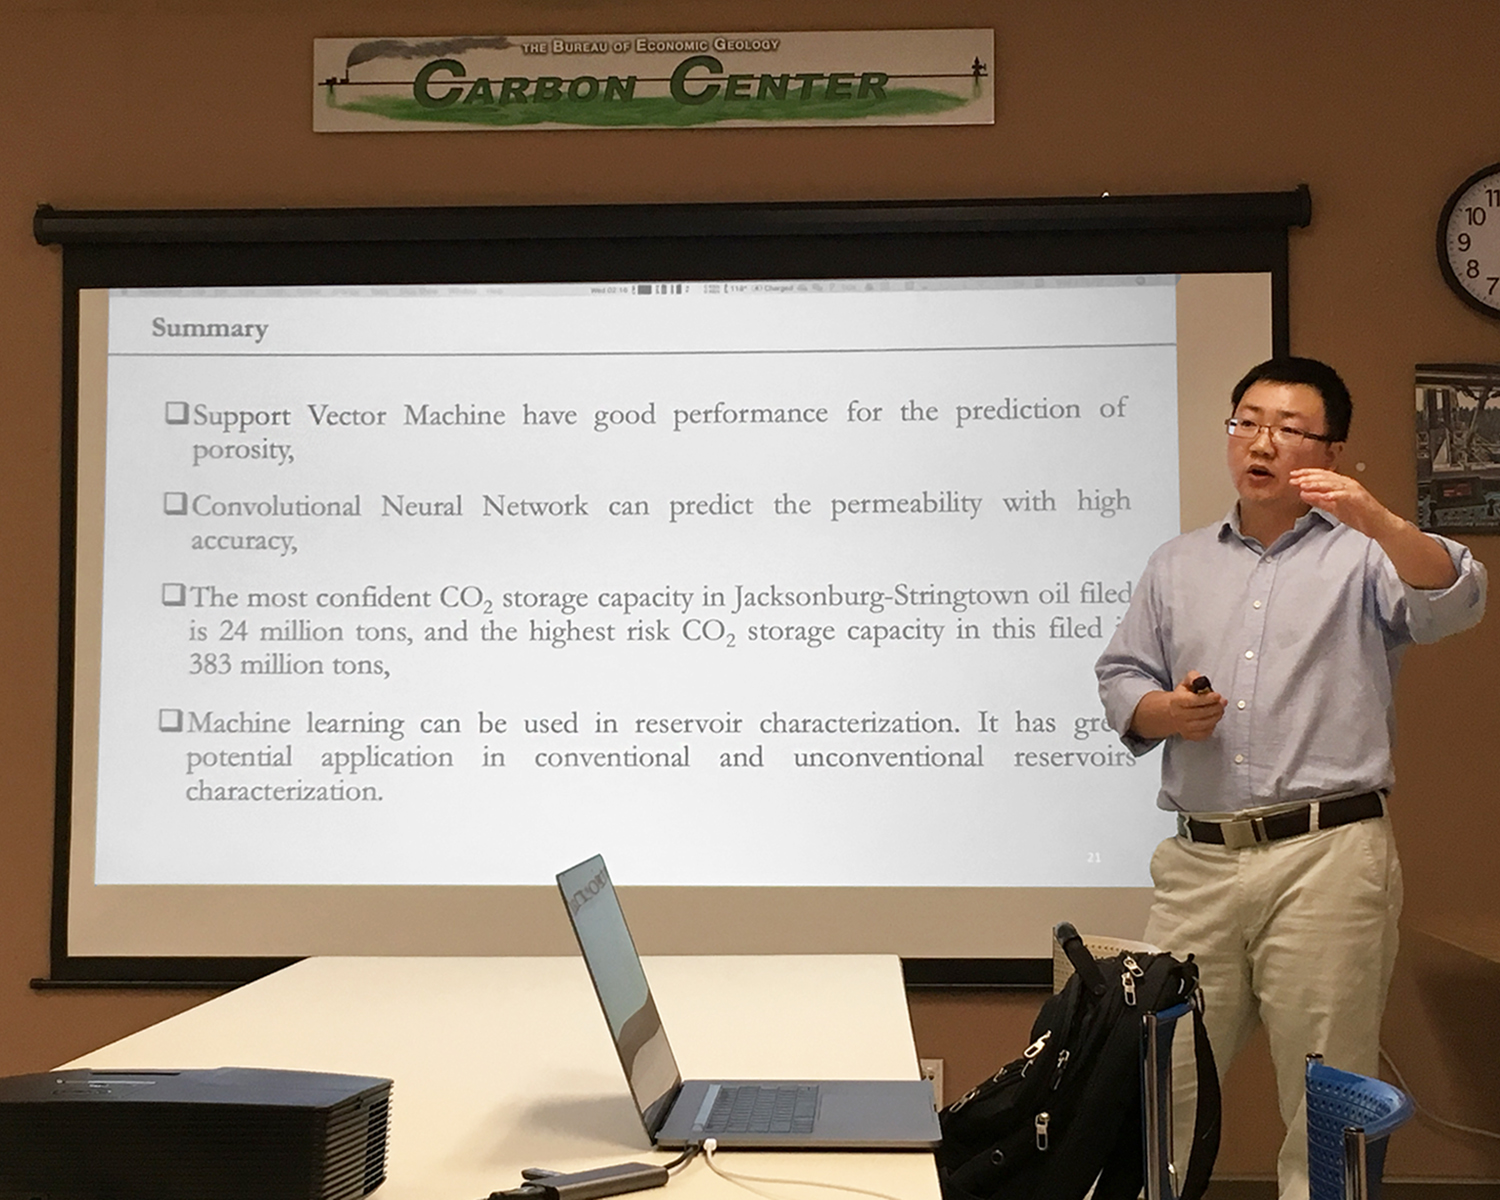 Zhi Zhong shows the summary slide of his presentation which says that machine learning methods of porosity and permeability have high accuracy and that machine learning can be used in unconventional and conventional reservoir characterization with success.